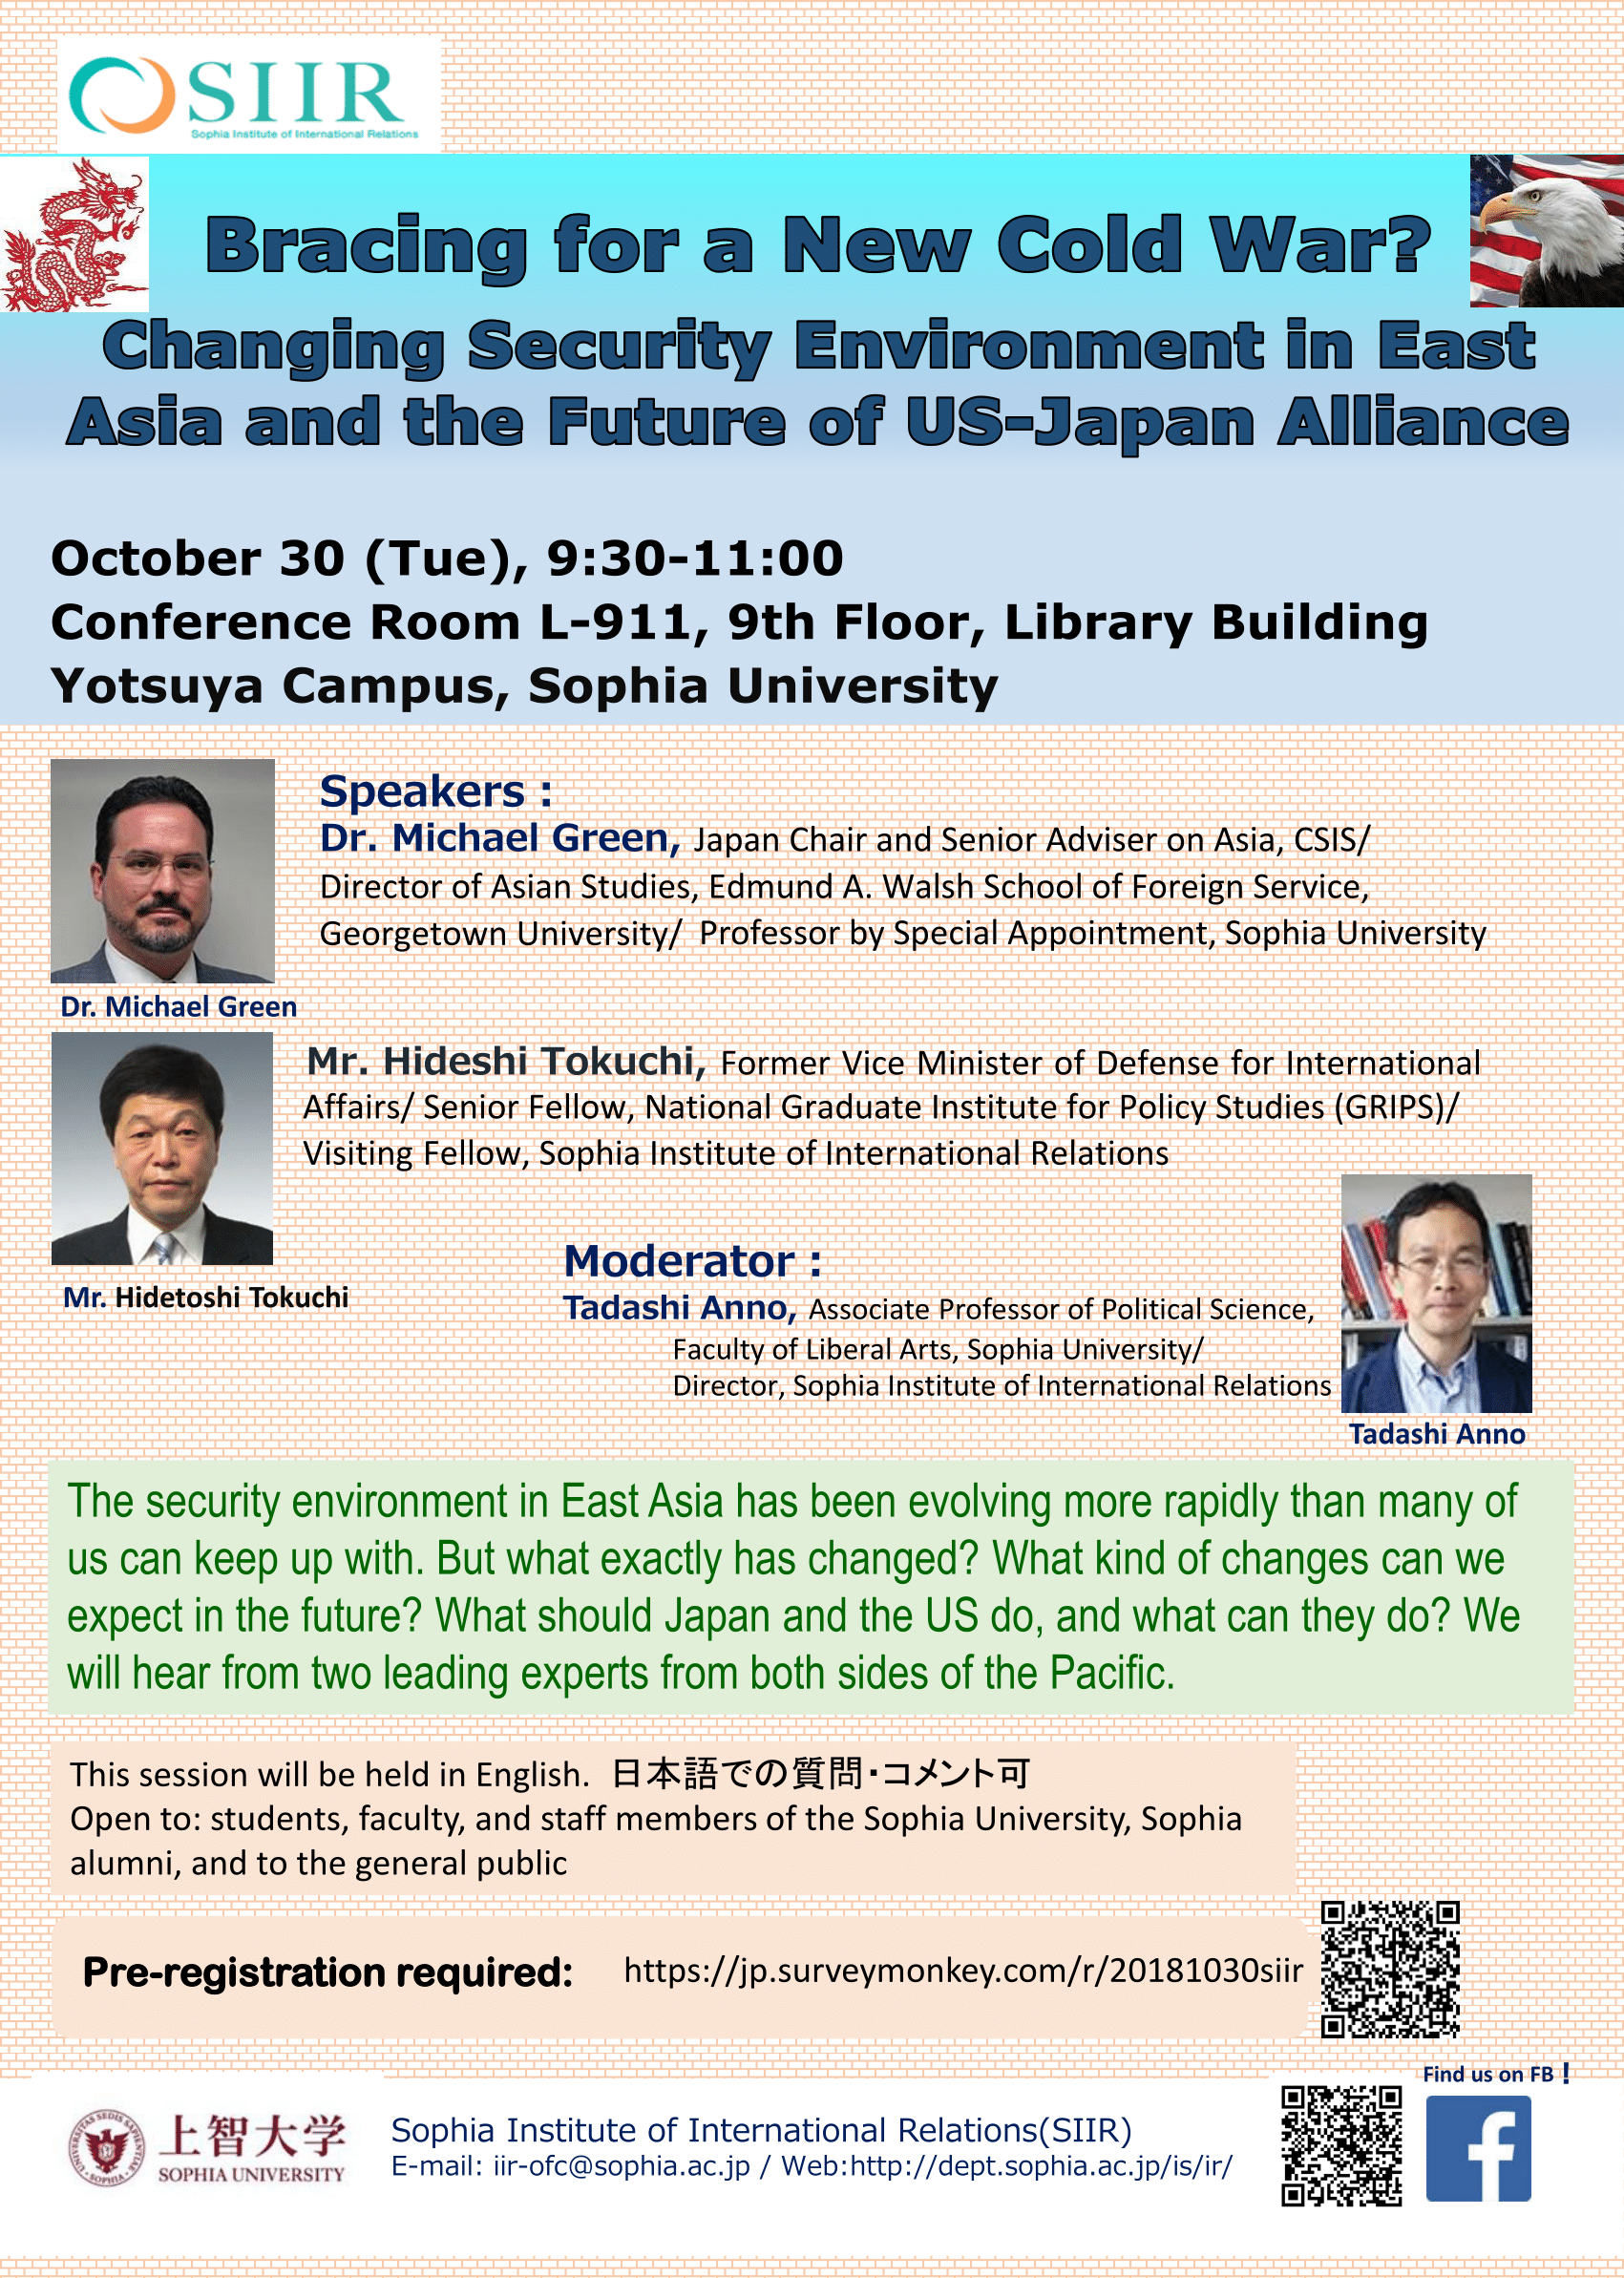 Round Table “Bracing for a New Cold War? Changing Security Environment in East Asia and the Future of US-Japan Alliance”